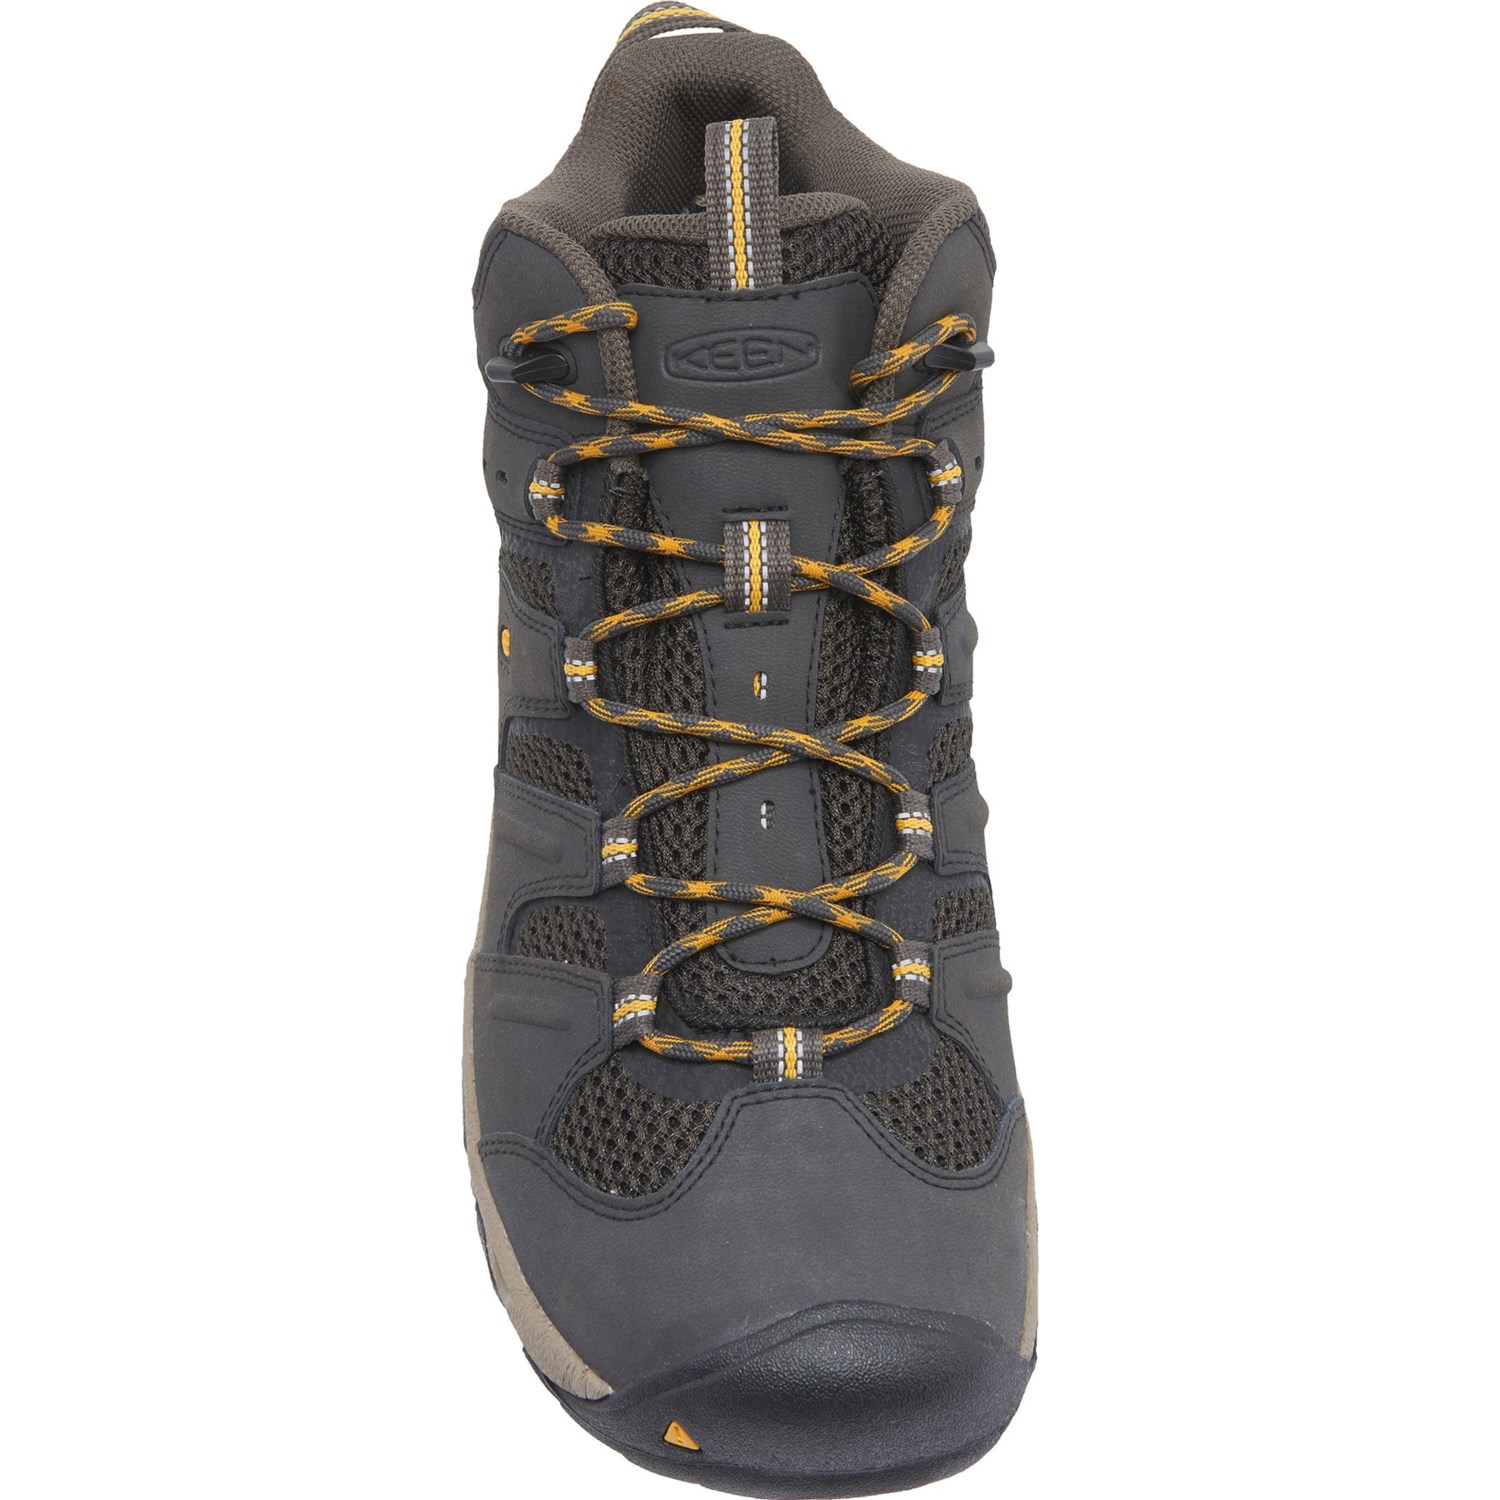 Keen Koven Mid Hiking Boots (For Men) - Save 33%